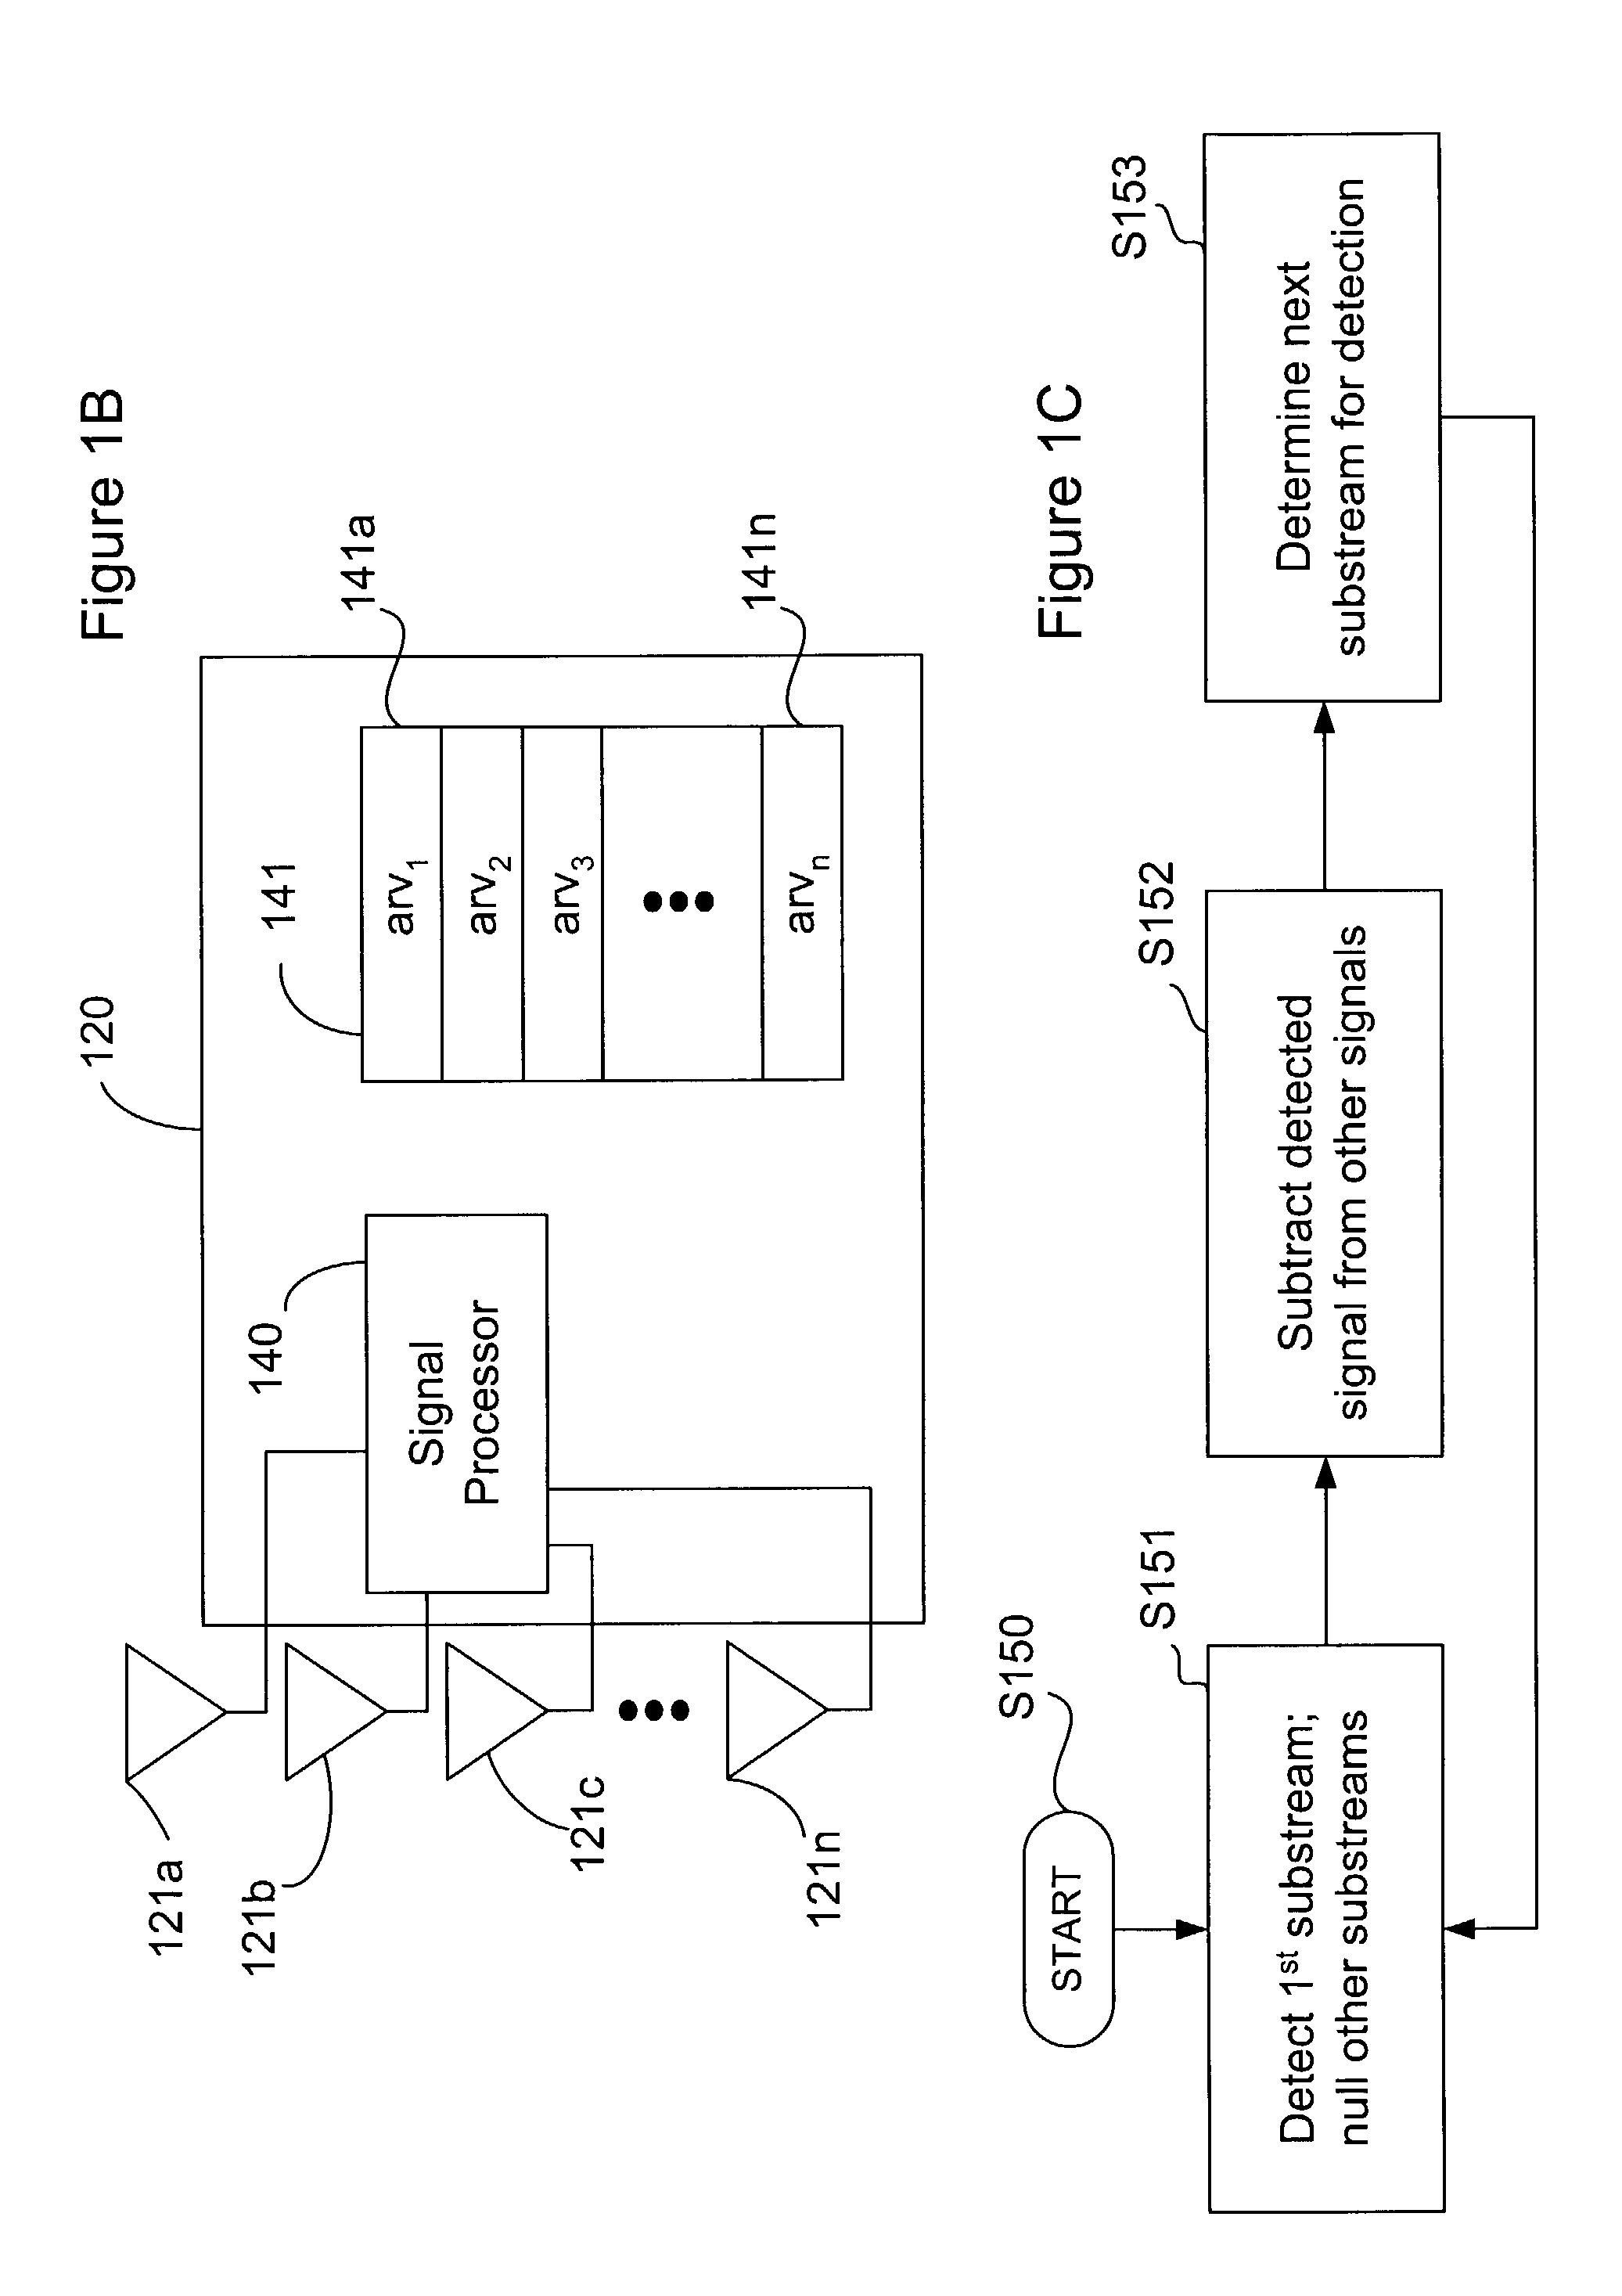 Method and system employing antenna arrays